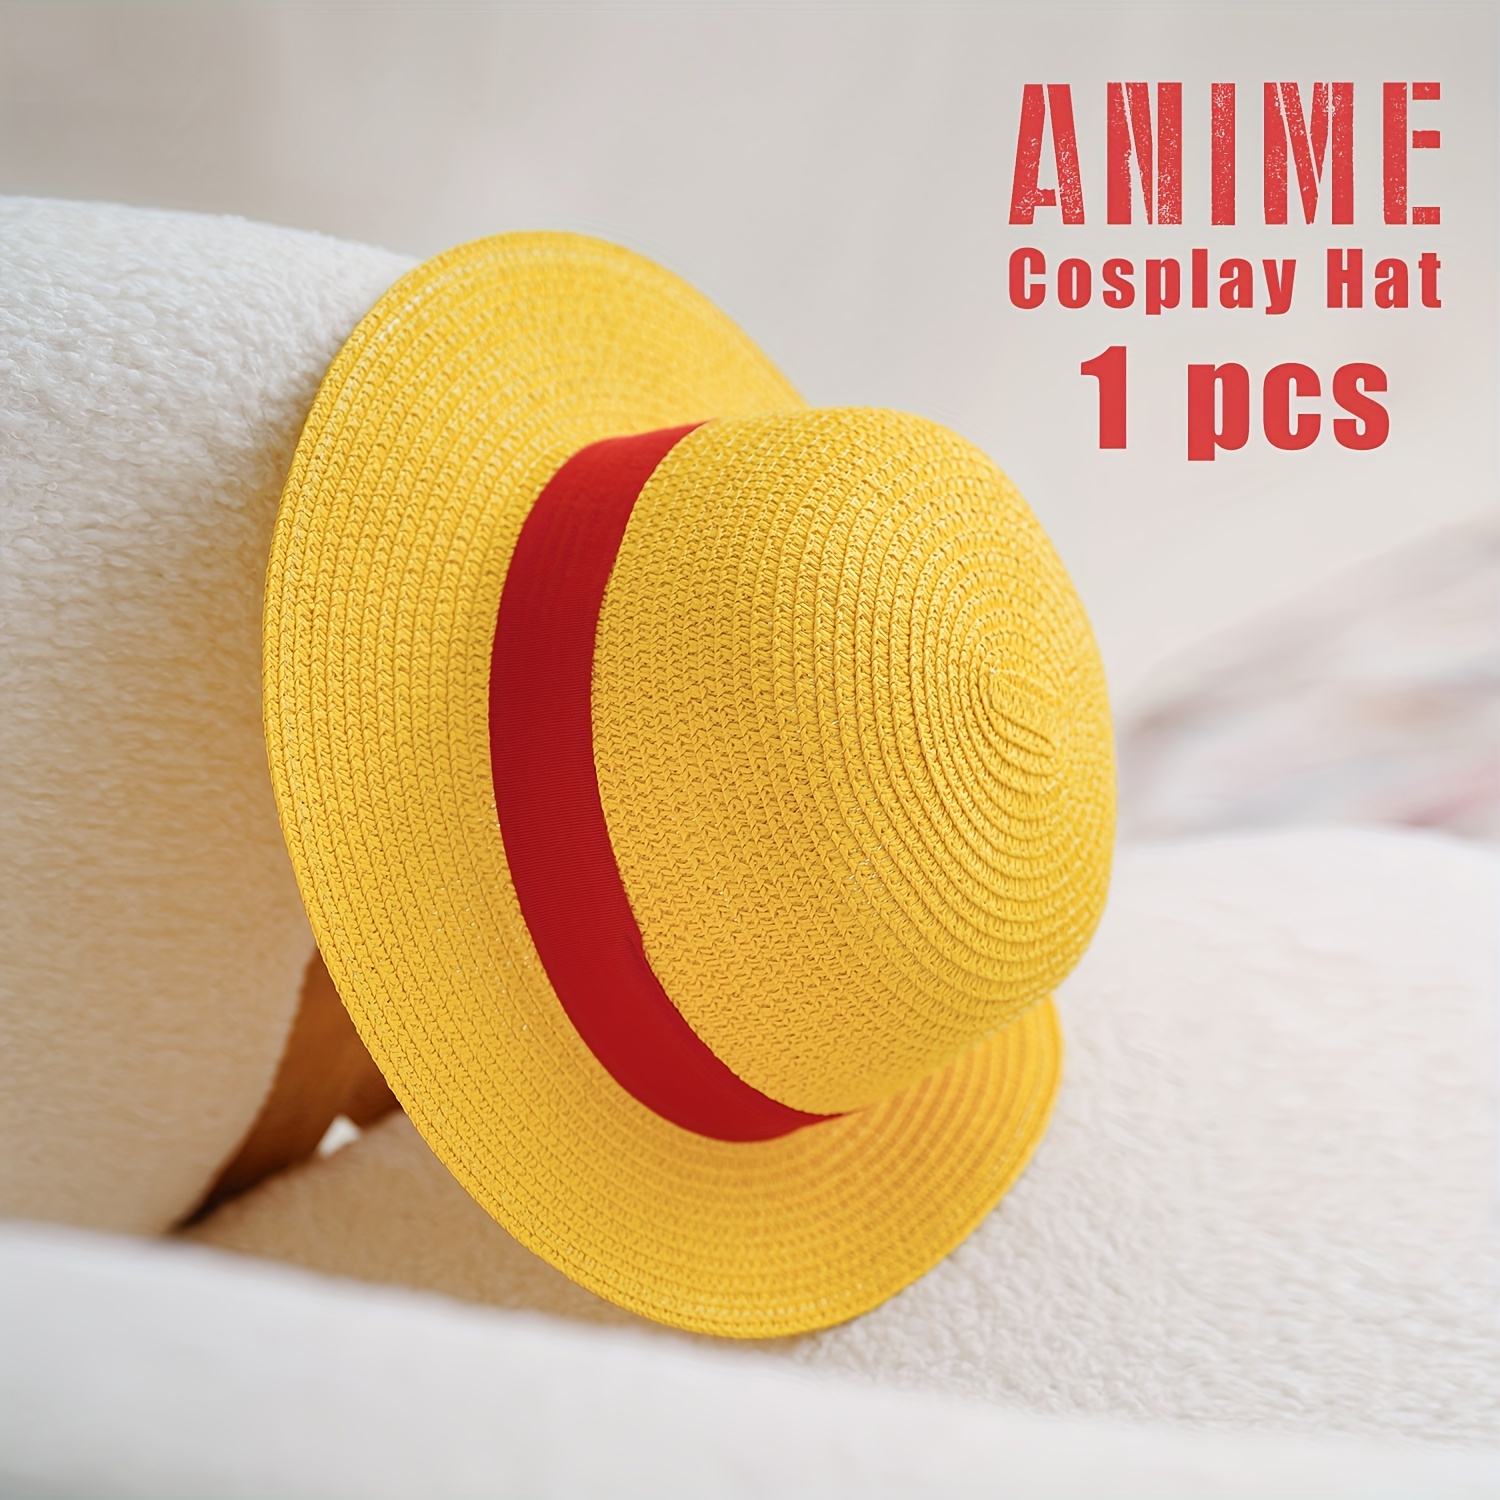 Monkey D Luffy Straw Hats Cosplay Accessory Anime Sun Beach Hat for Men Boys Halloween Party Travel